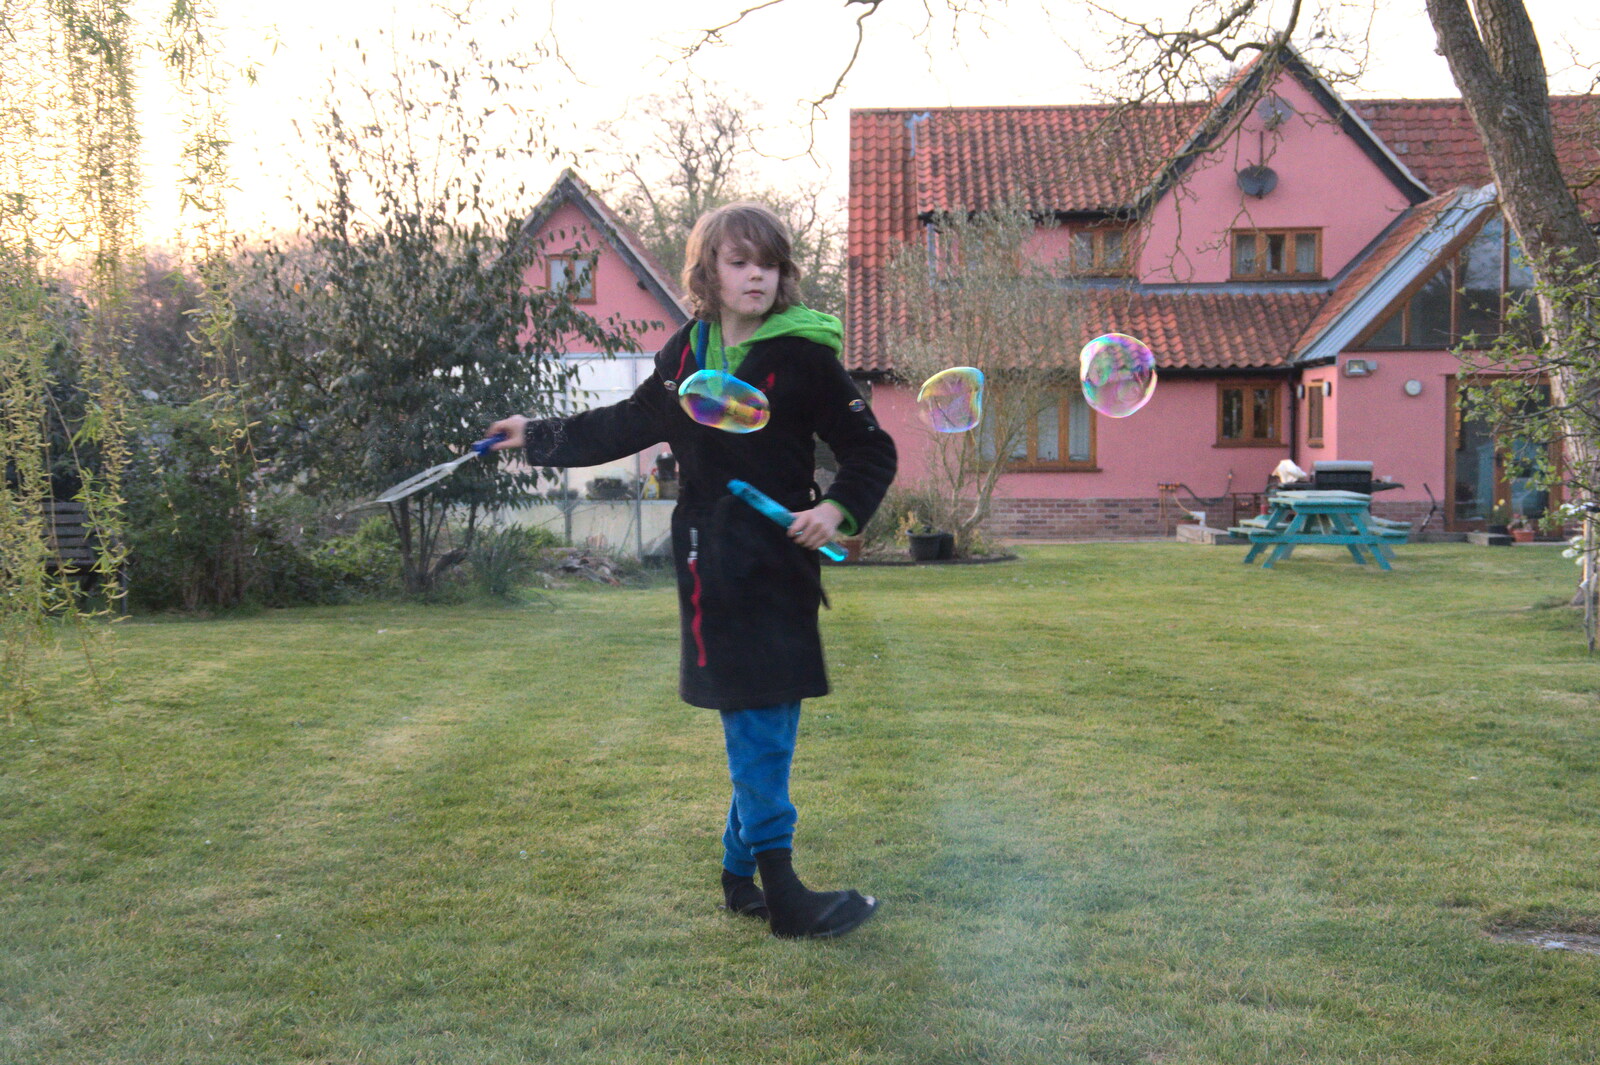 Fred does bubbles from A Weekend Camping Trip in the Garden, Brome, Suffolk - 11th April 2020